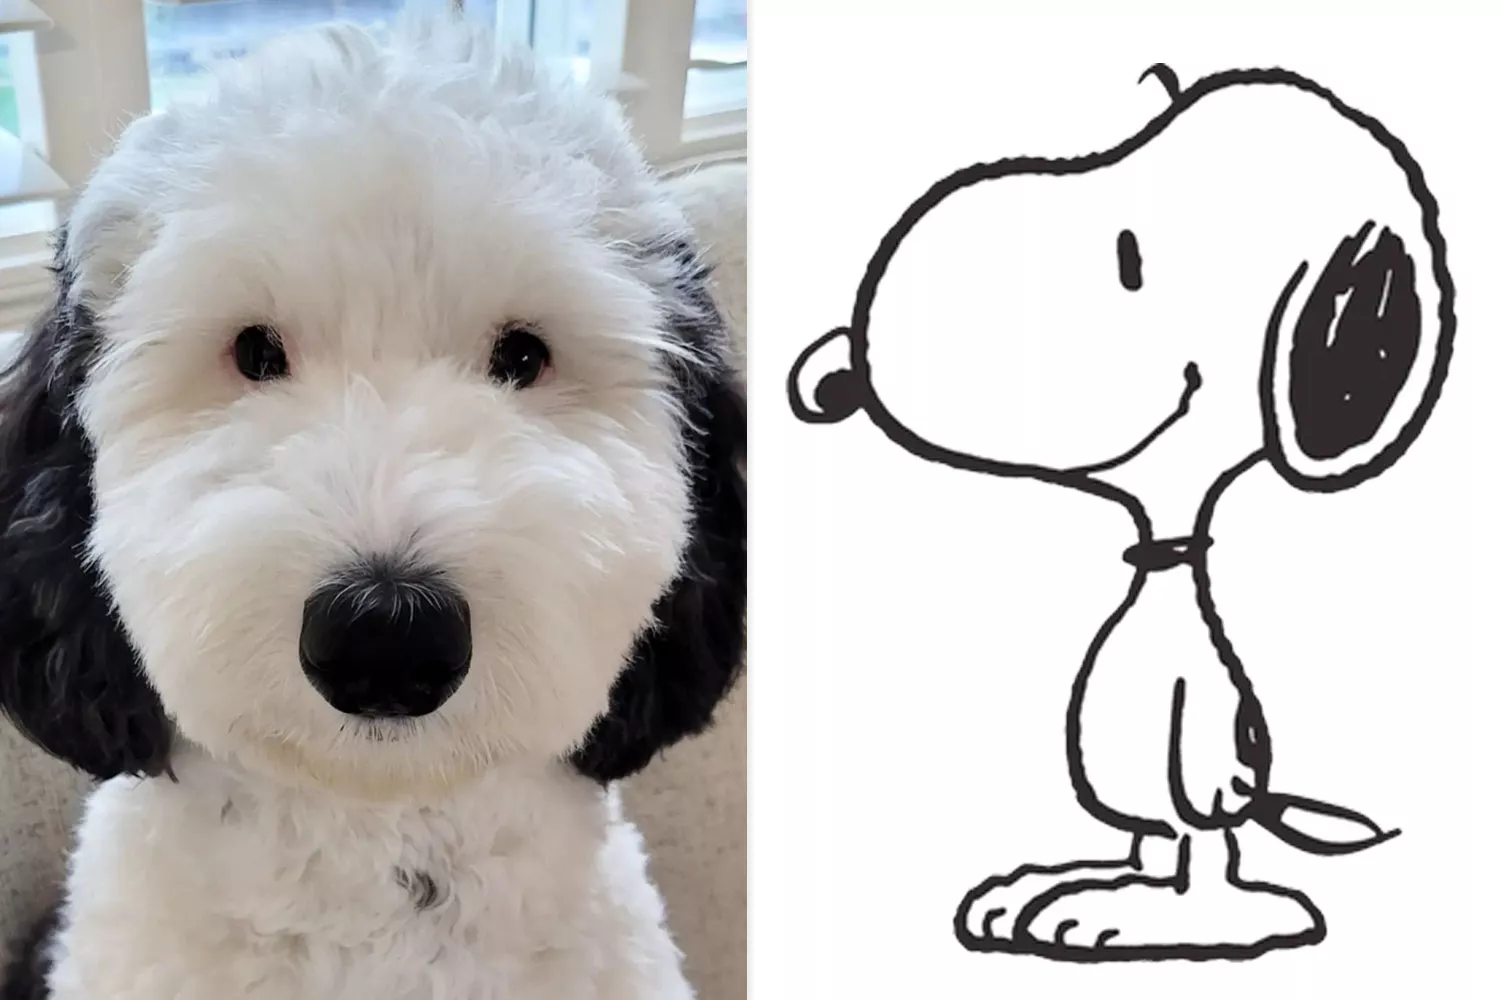 dog that looks like Snoopy from Peanuts.